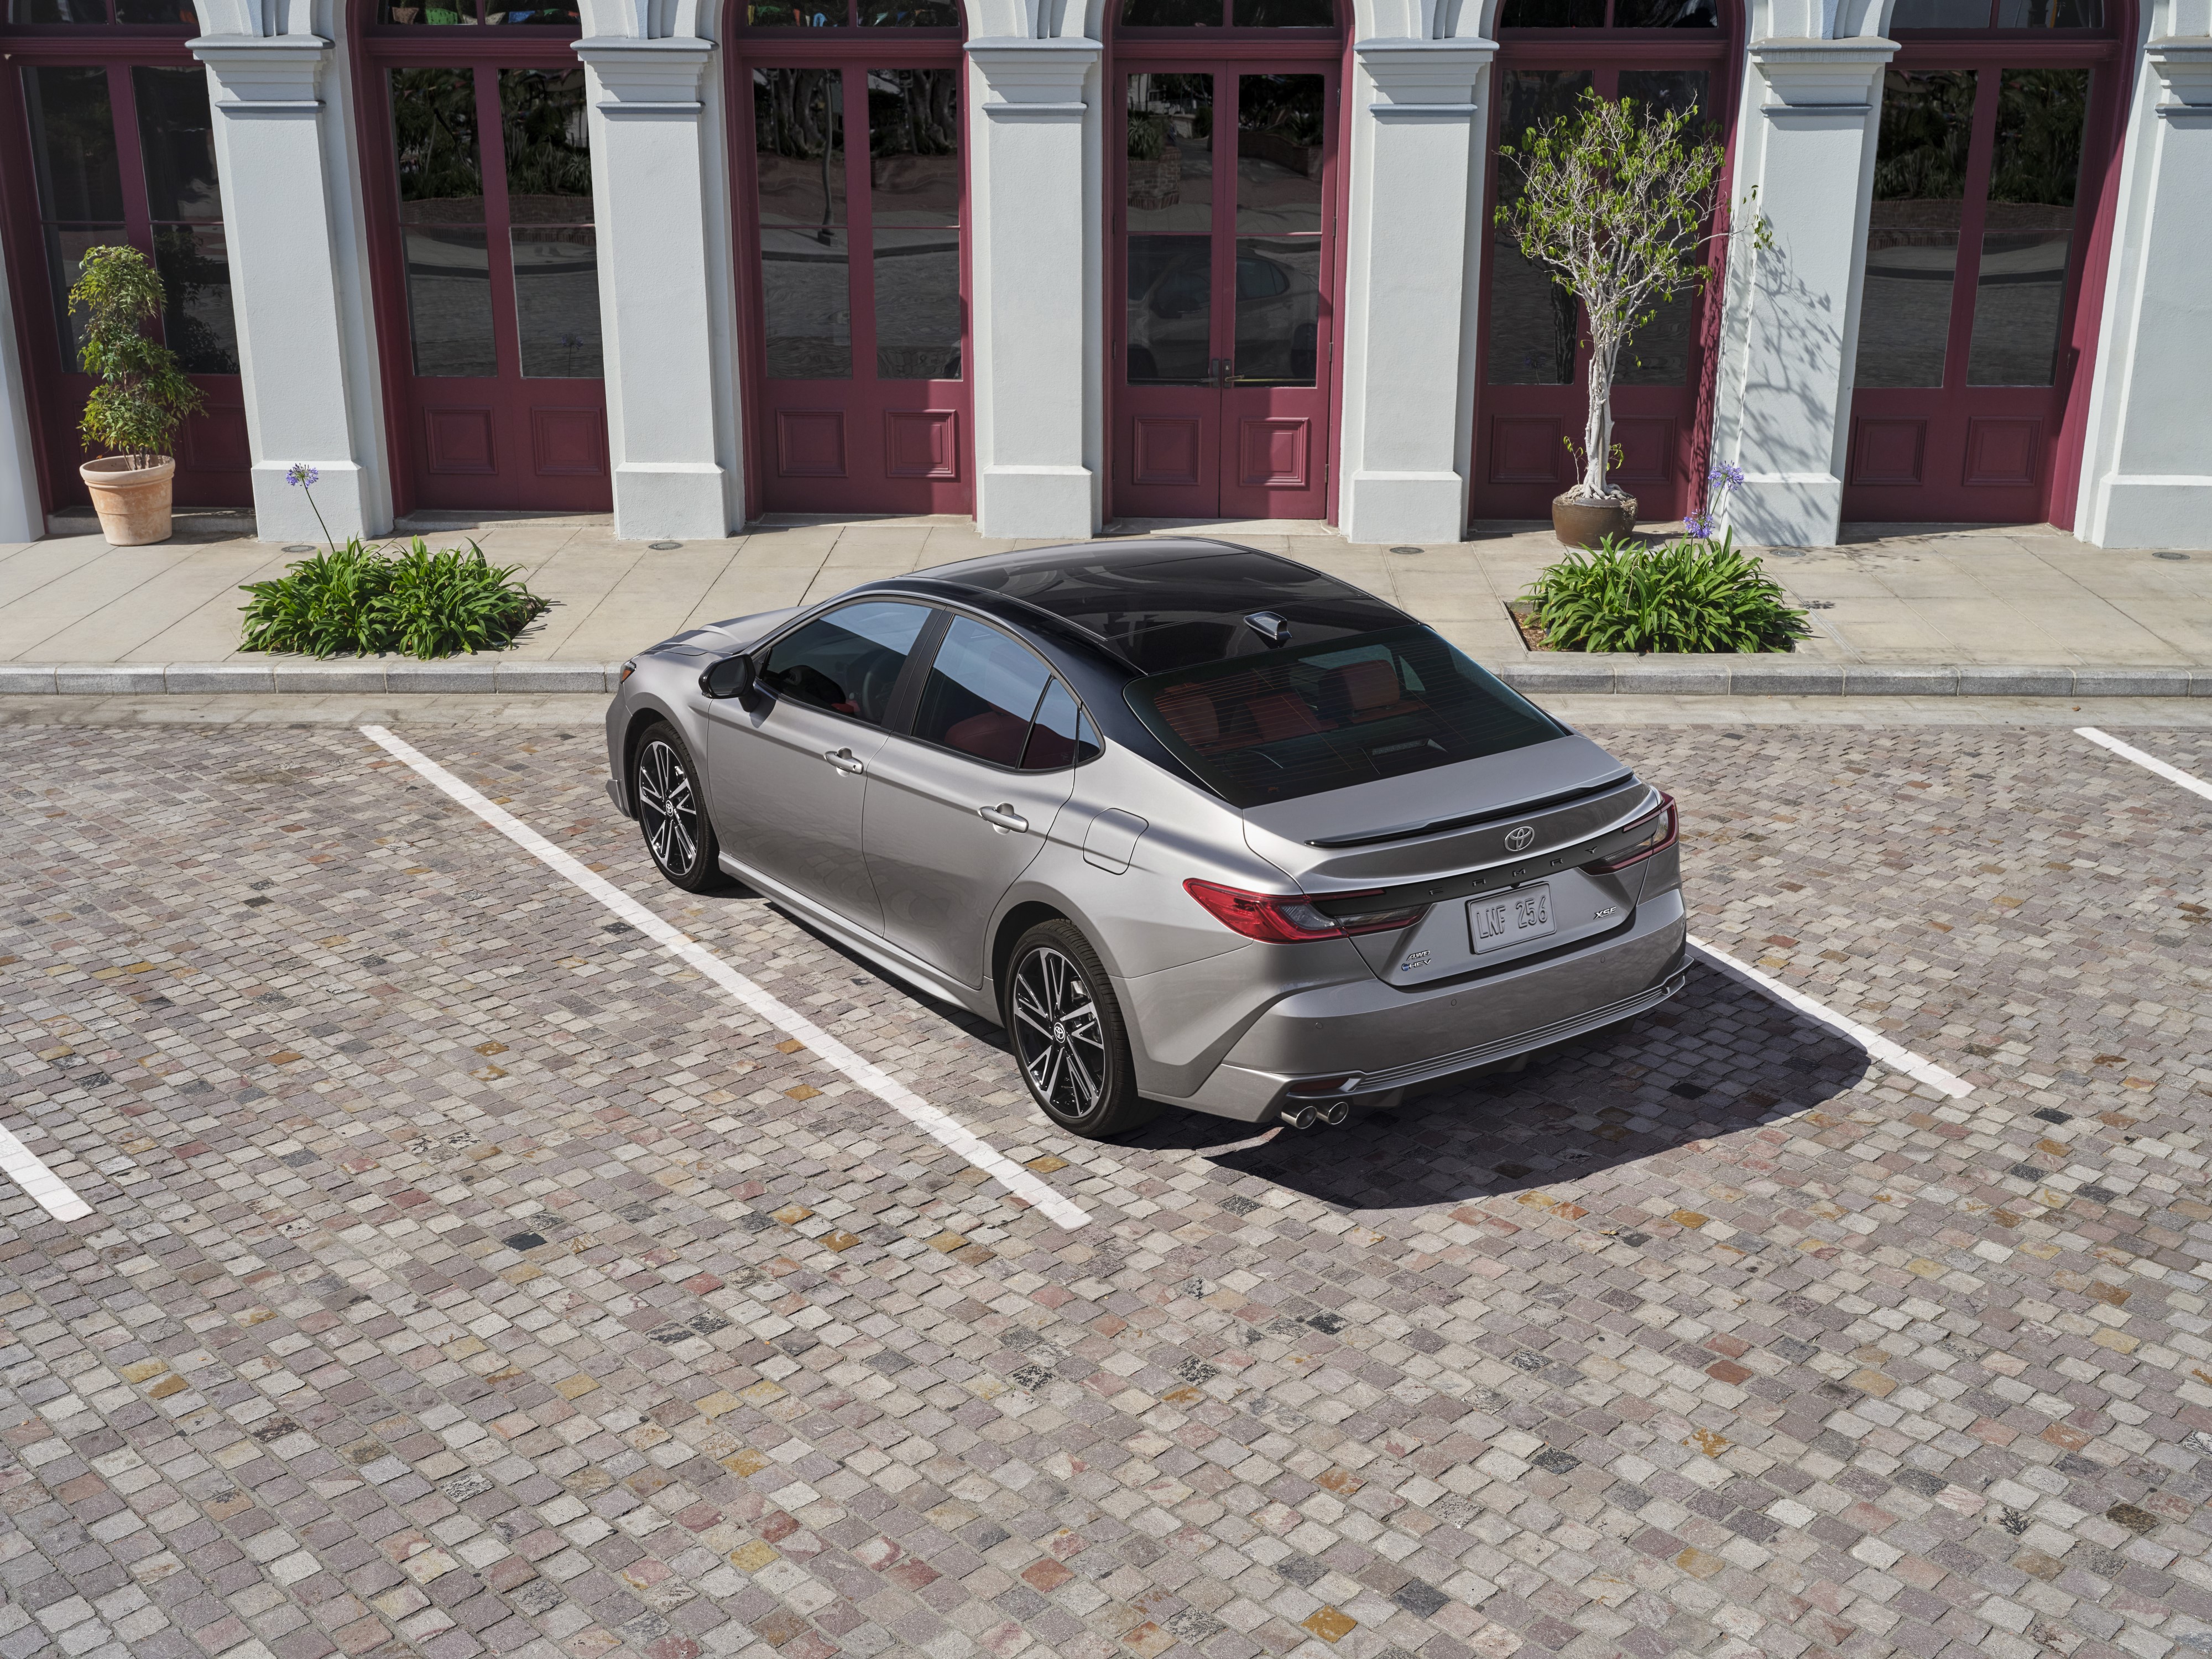 2025 Toyota Camry XSE in Celestial Silver with Jet Black Roof parked in front of landmark